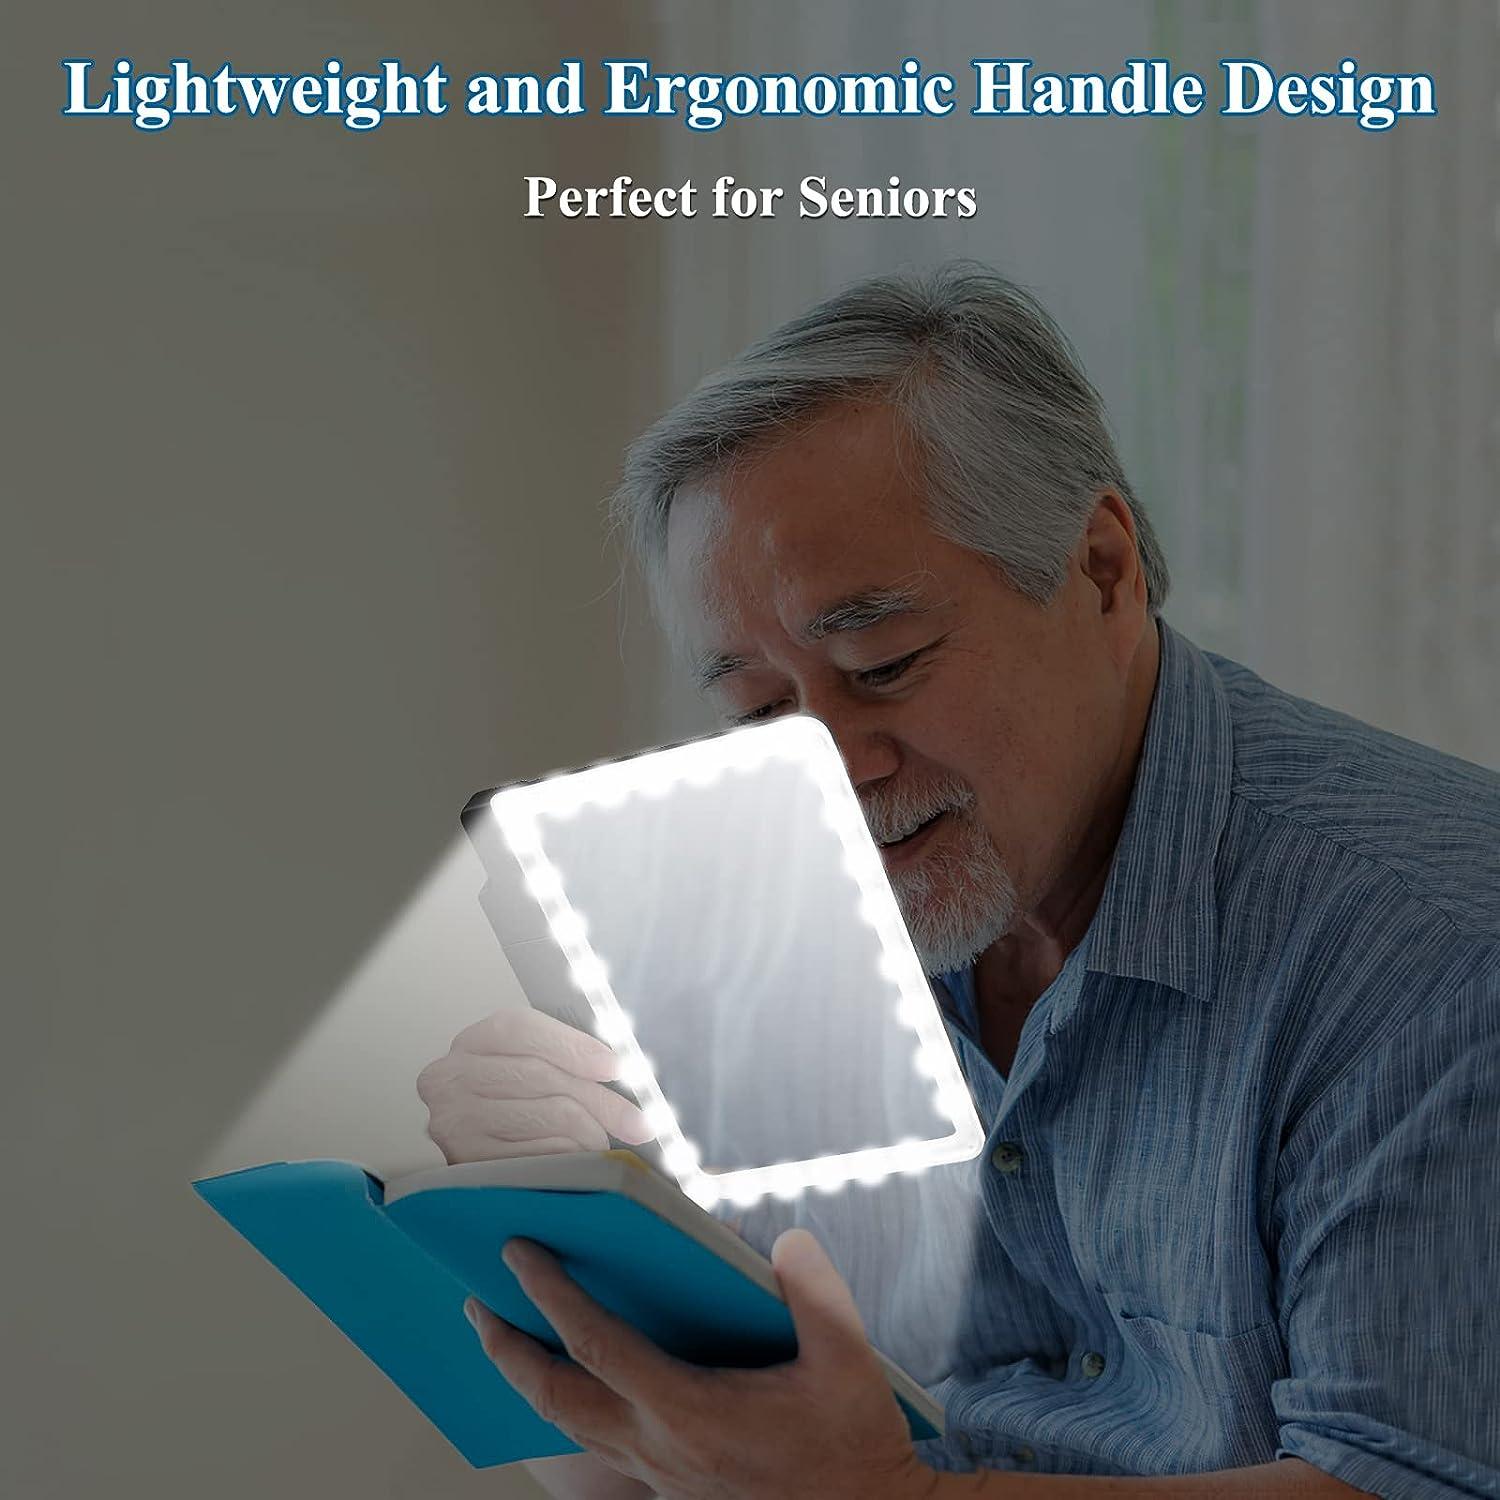 magnifying glass with light For Flawless Viewing And Reading 